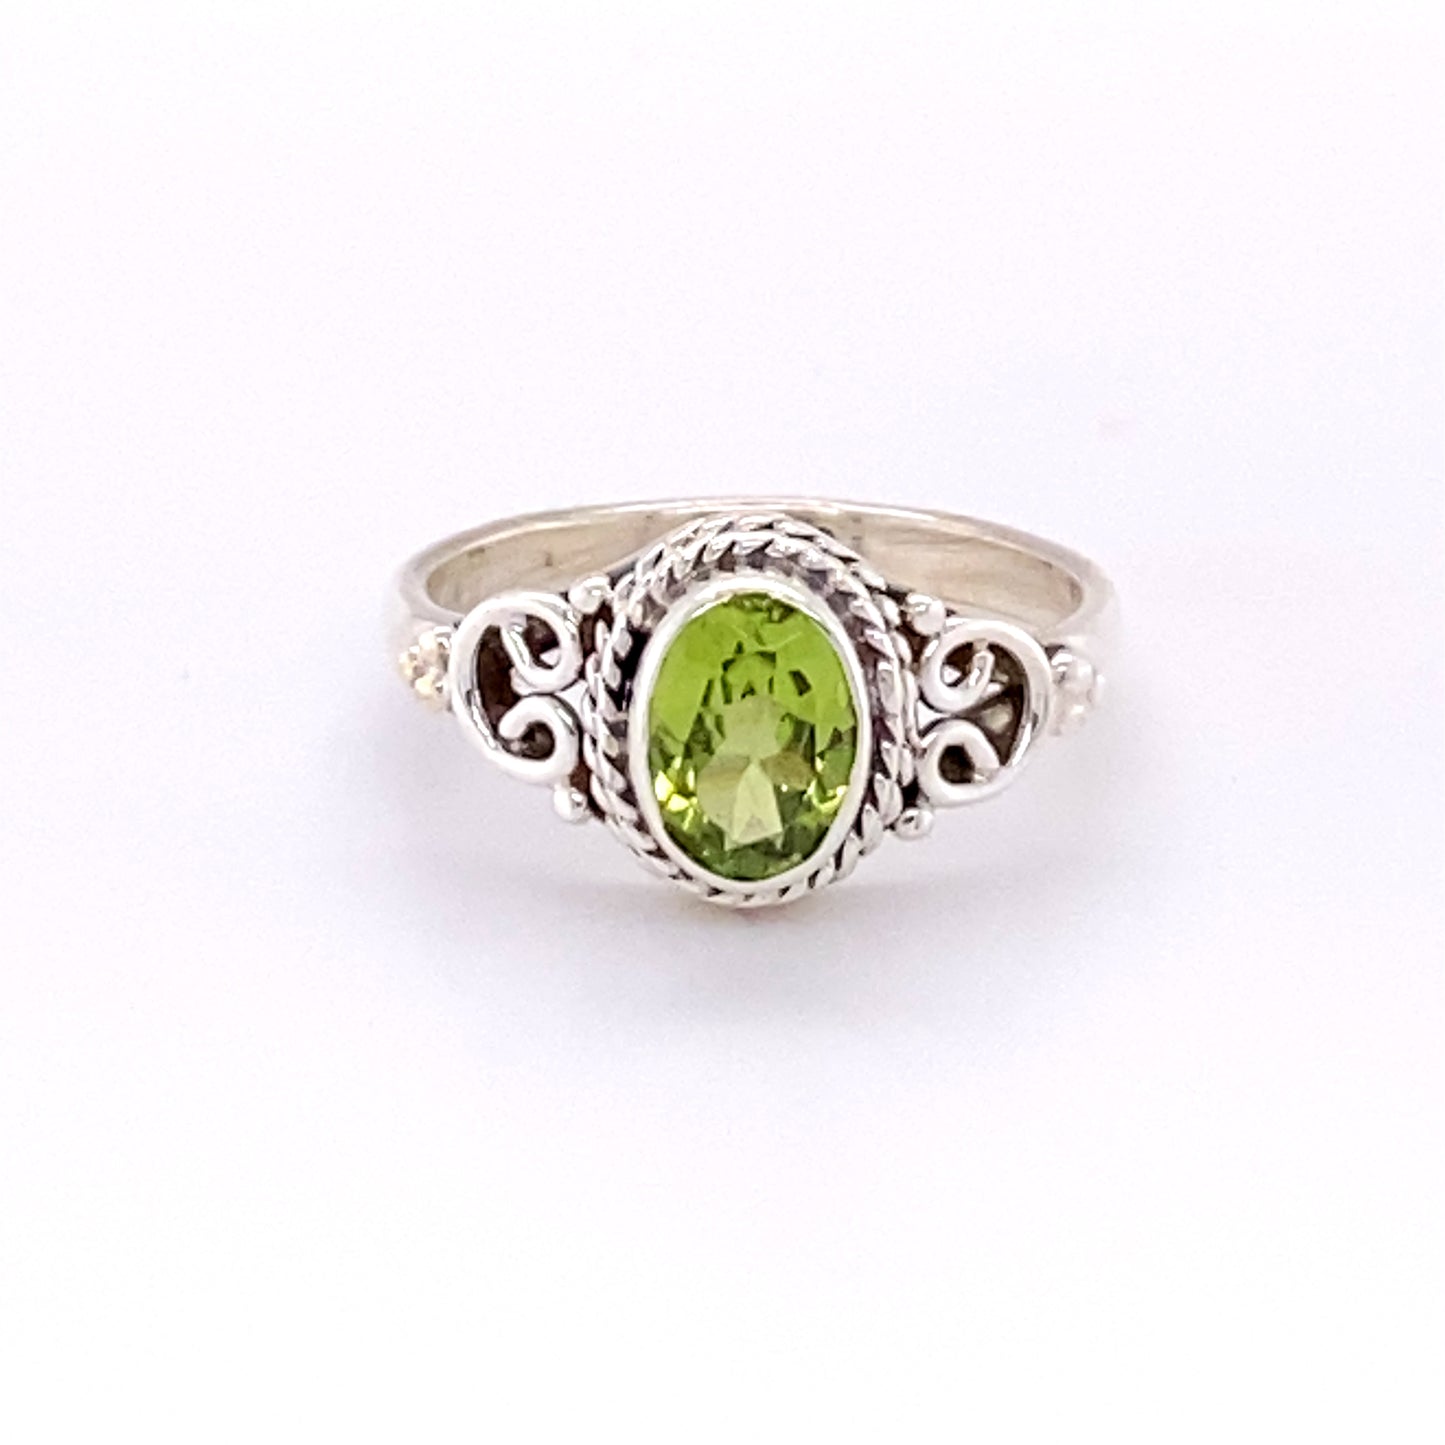 This Super Silver Oval Peridot Ring with Rope and Swirl Border showcases a stunning peridot surrounded by sparkling diamonds.